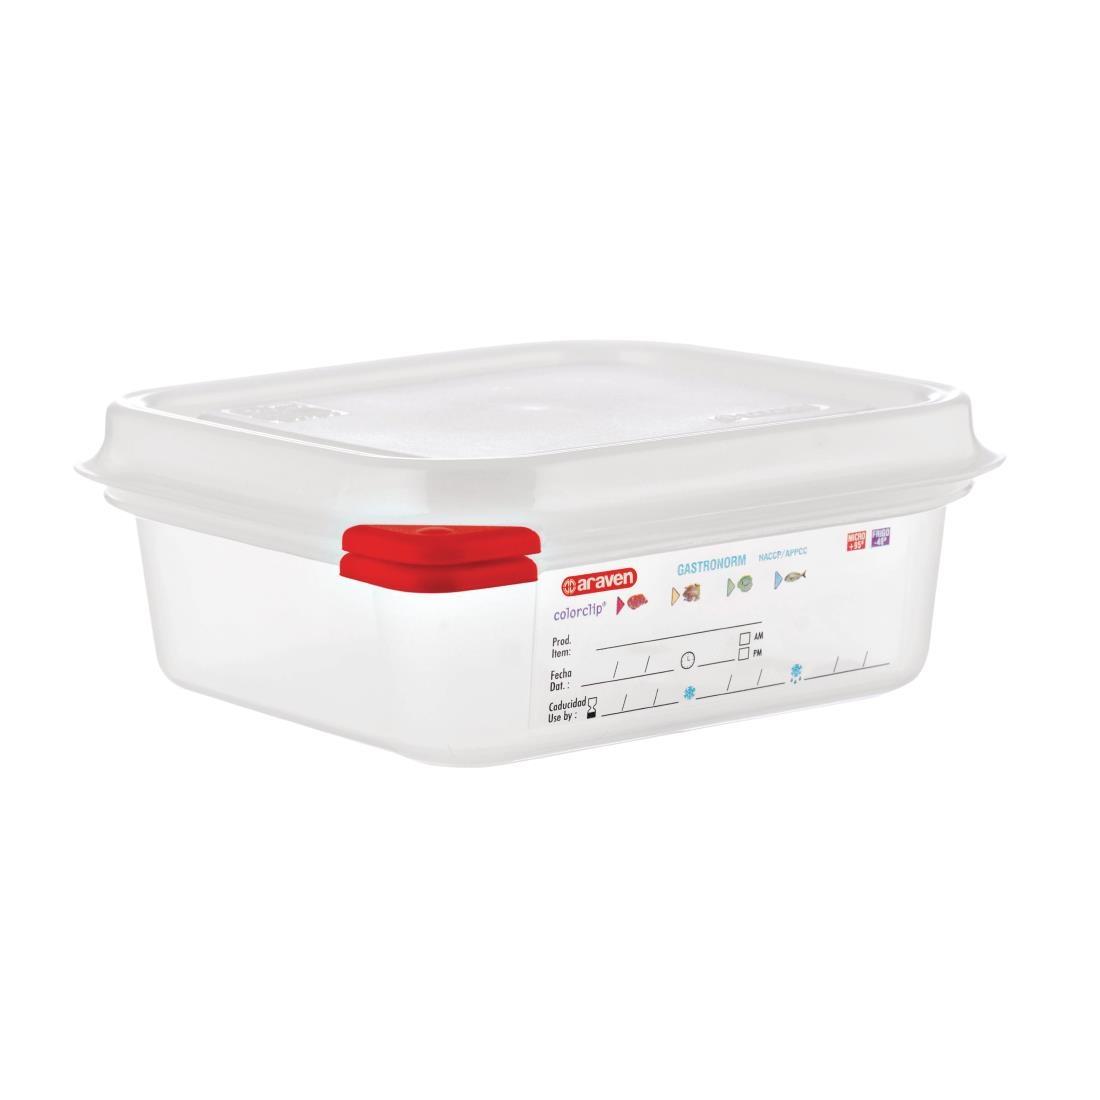 Araven Polypropylene 1/6 Gastronorm Food Storage Containers 1.1Ltr (Pack of 4) - GL264  - 1